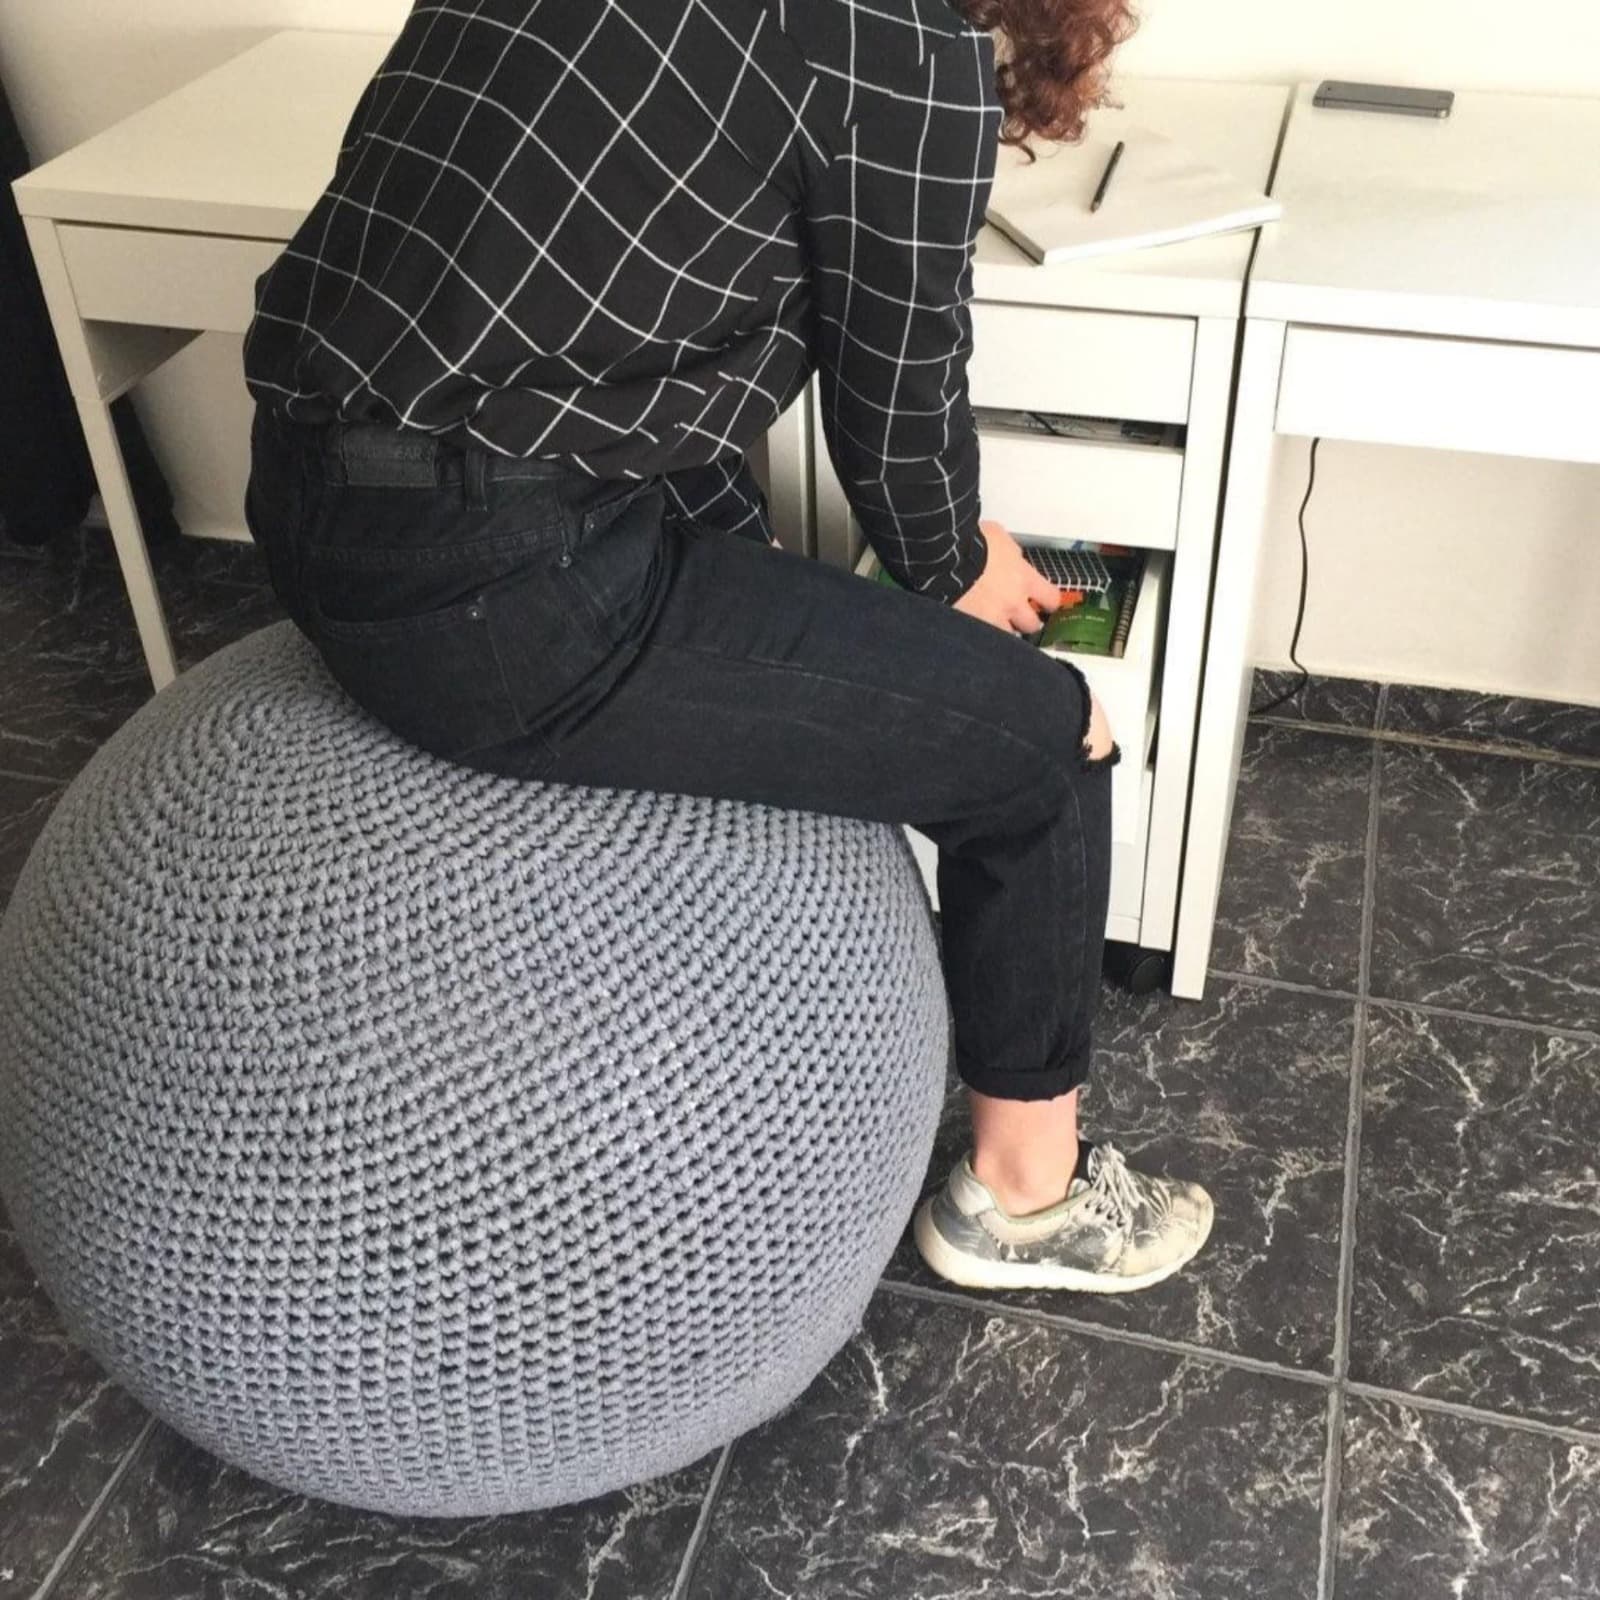 Gym Ball Cover 75 cm, Office Ball Sitting Chair - Looping Home